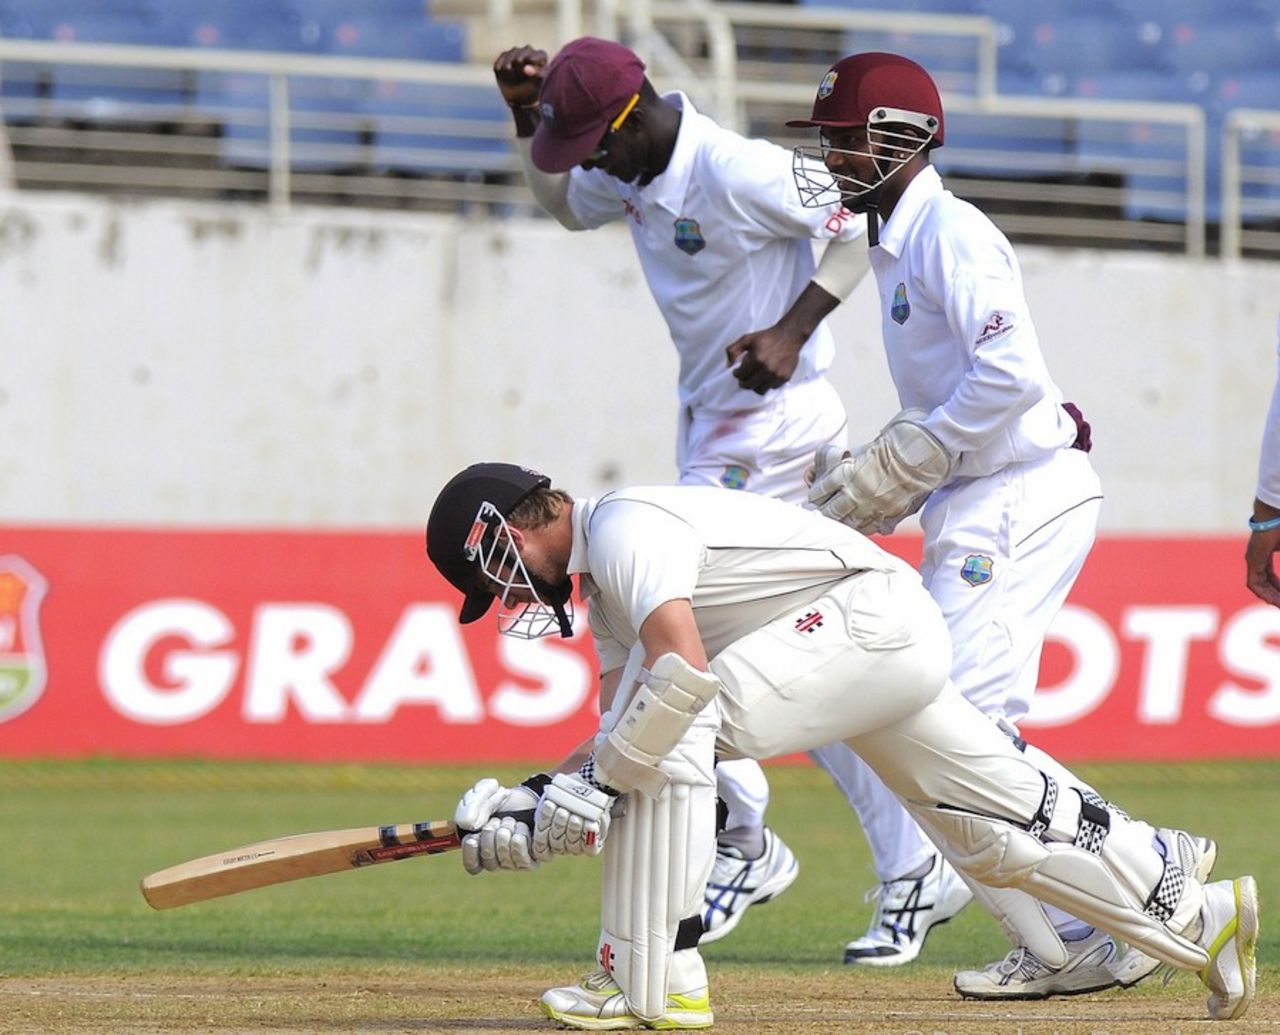 Kane Williamson was dismissed for 22, West Indies v New Zealand, 2nd Test, Jamaica, 1st day, August 2, 2012